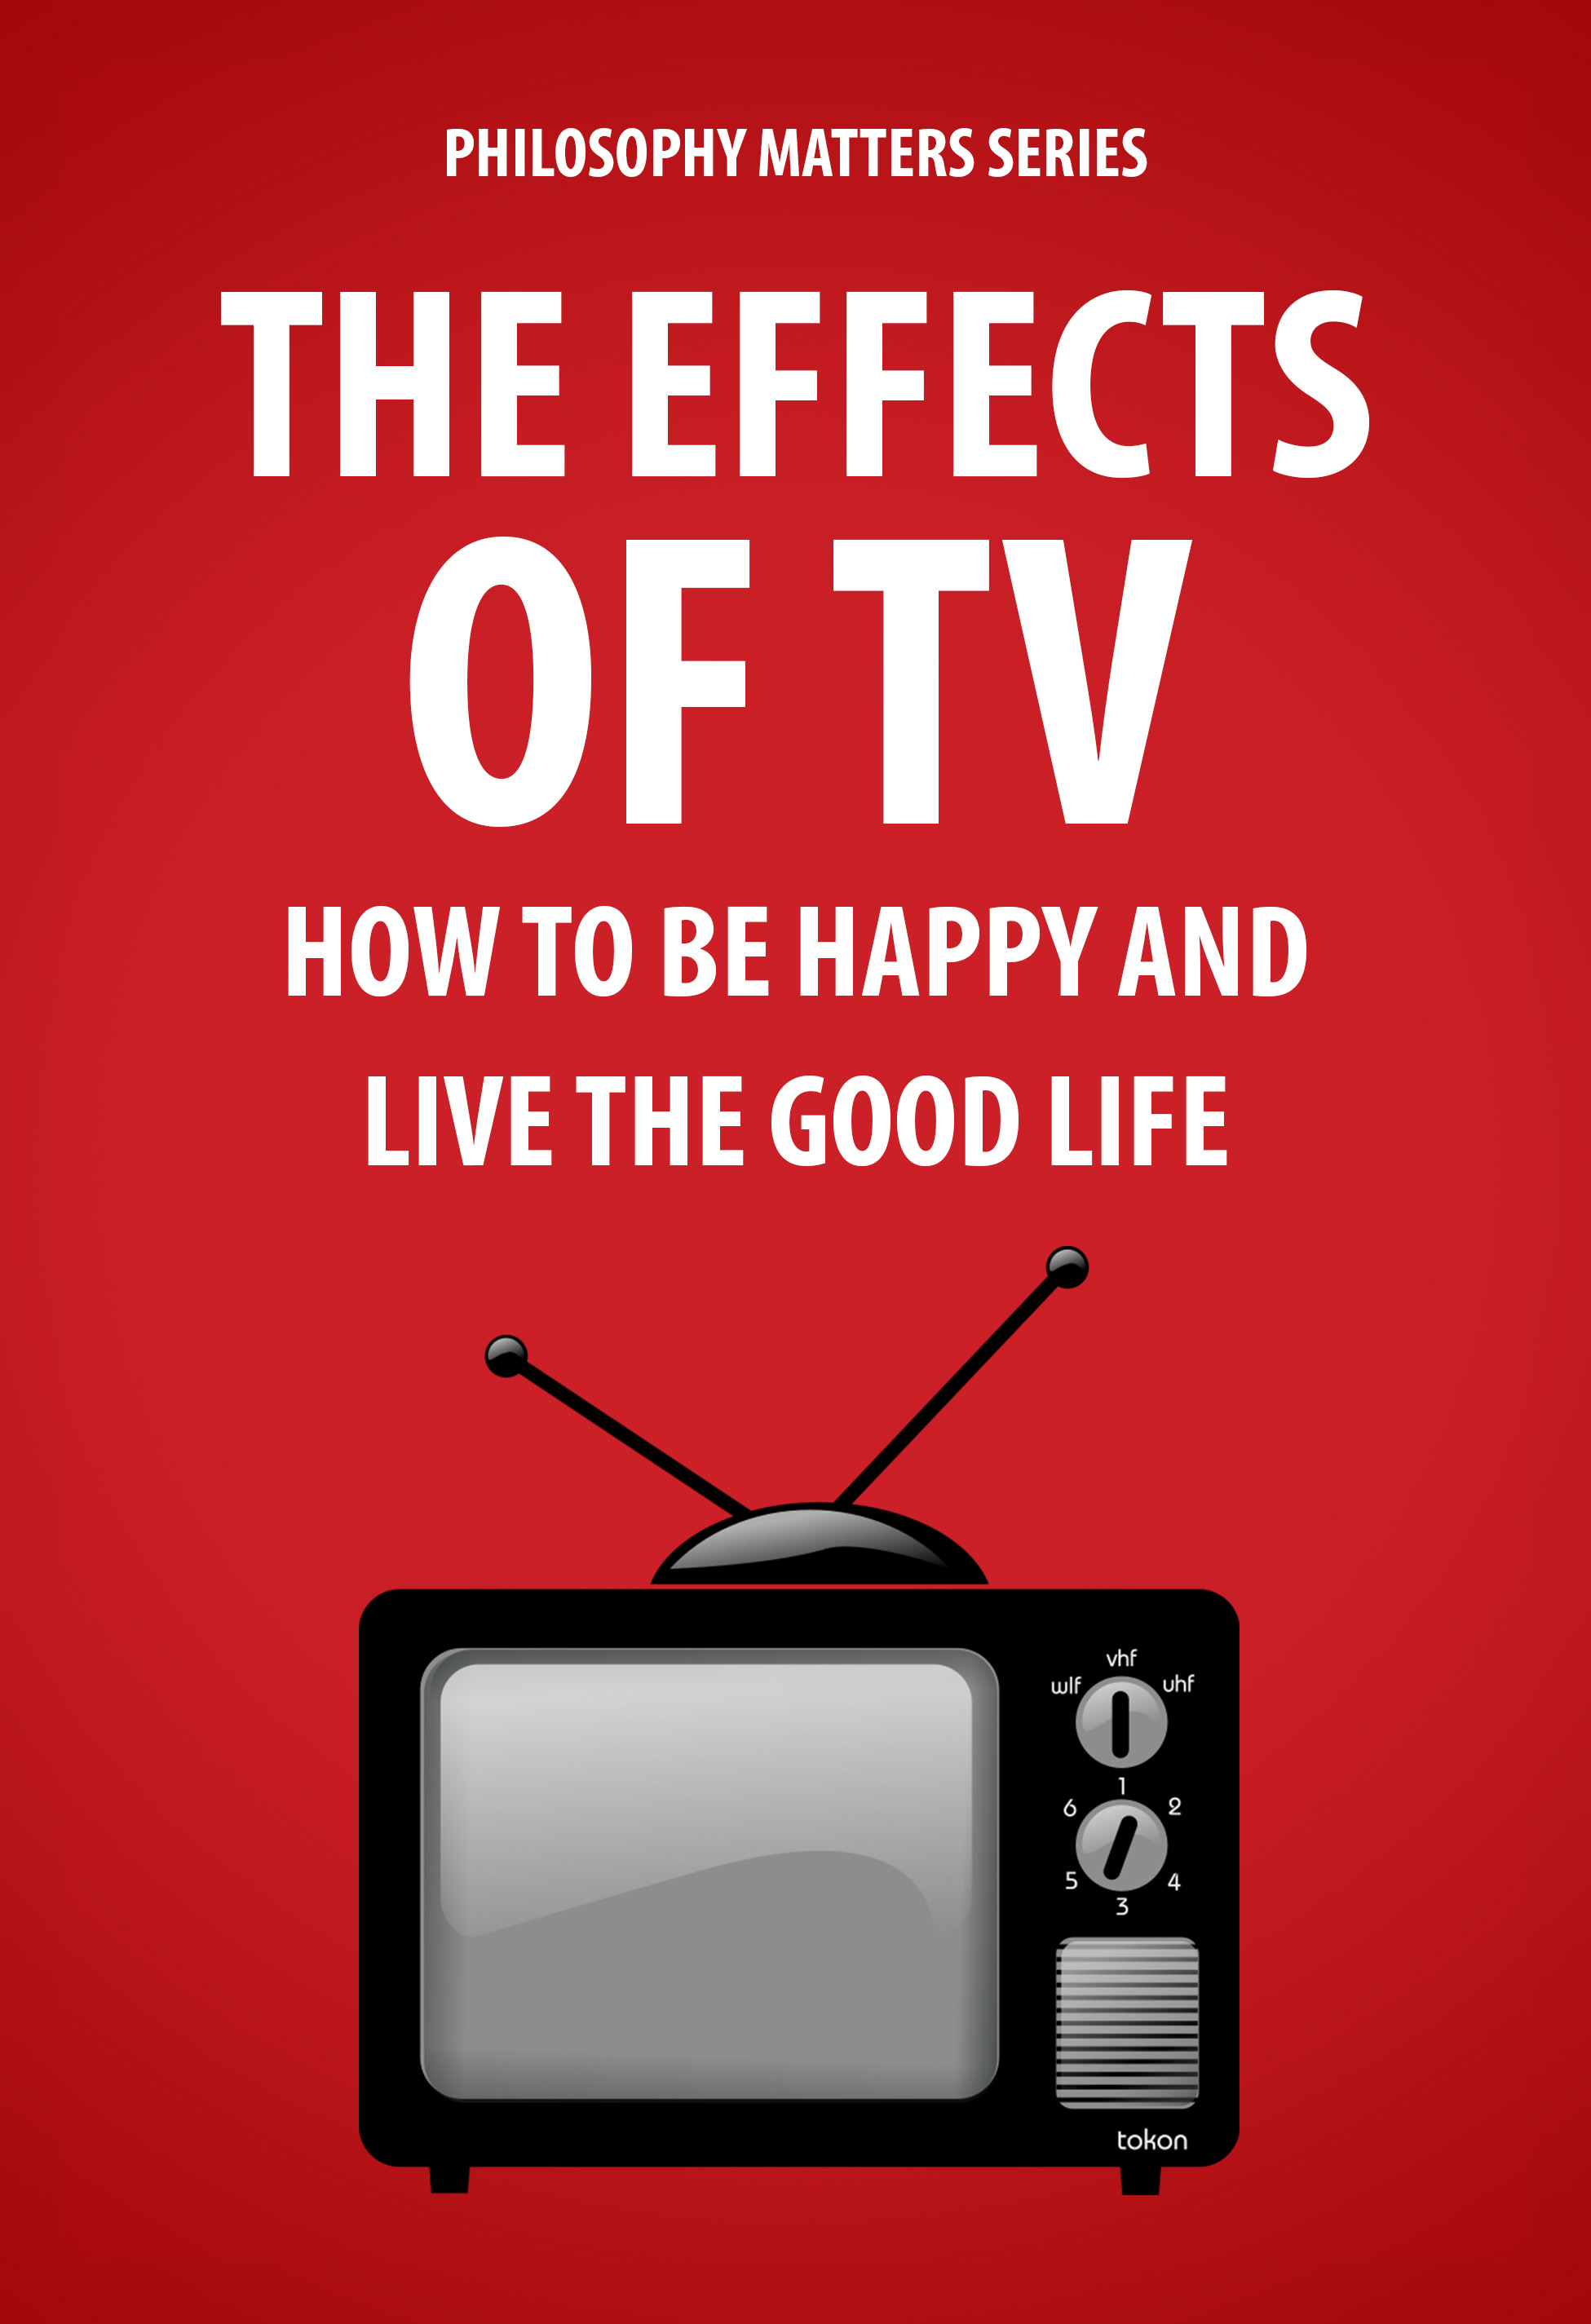 The Effects of TV